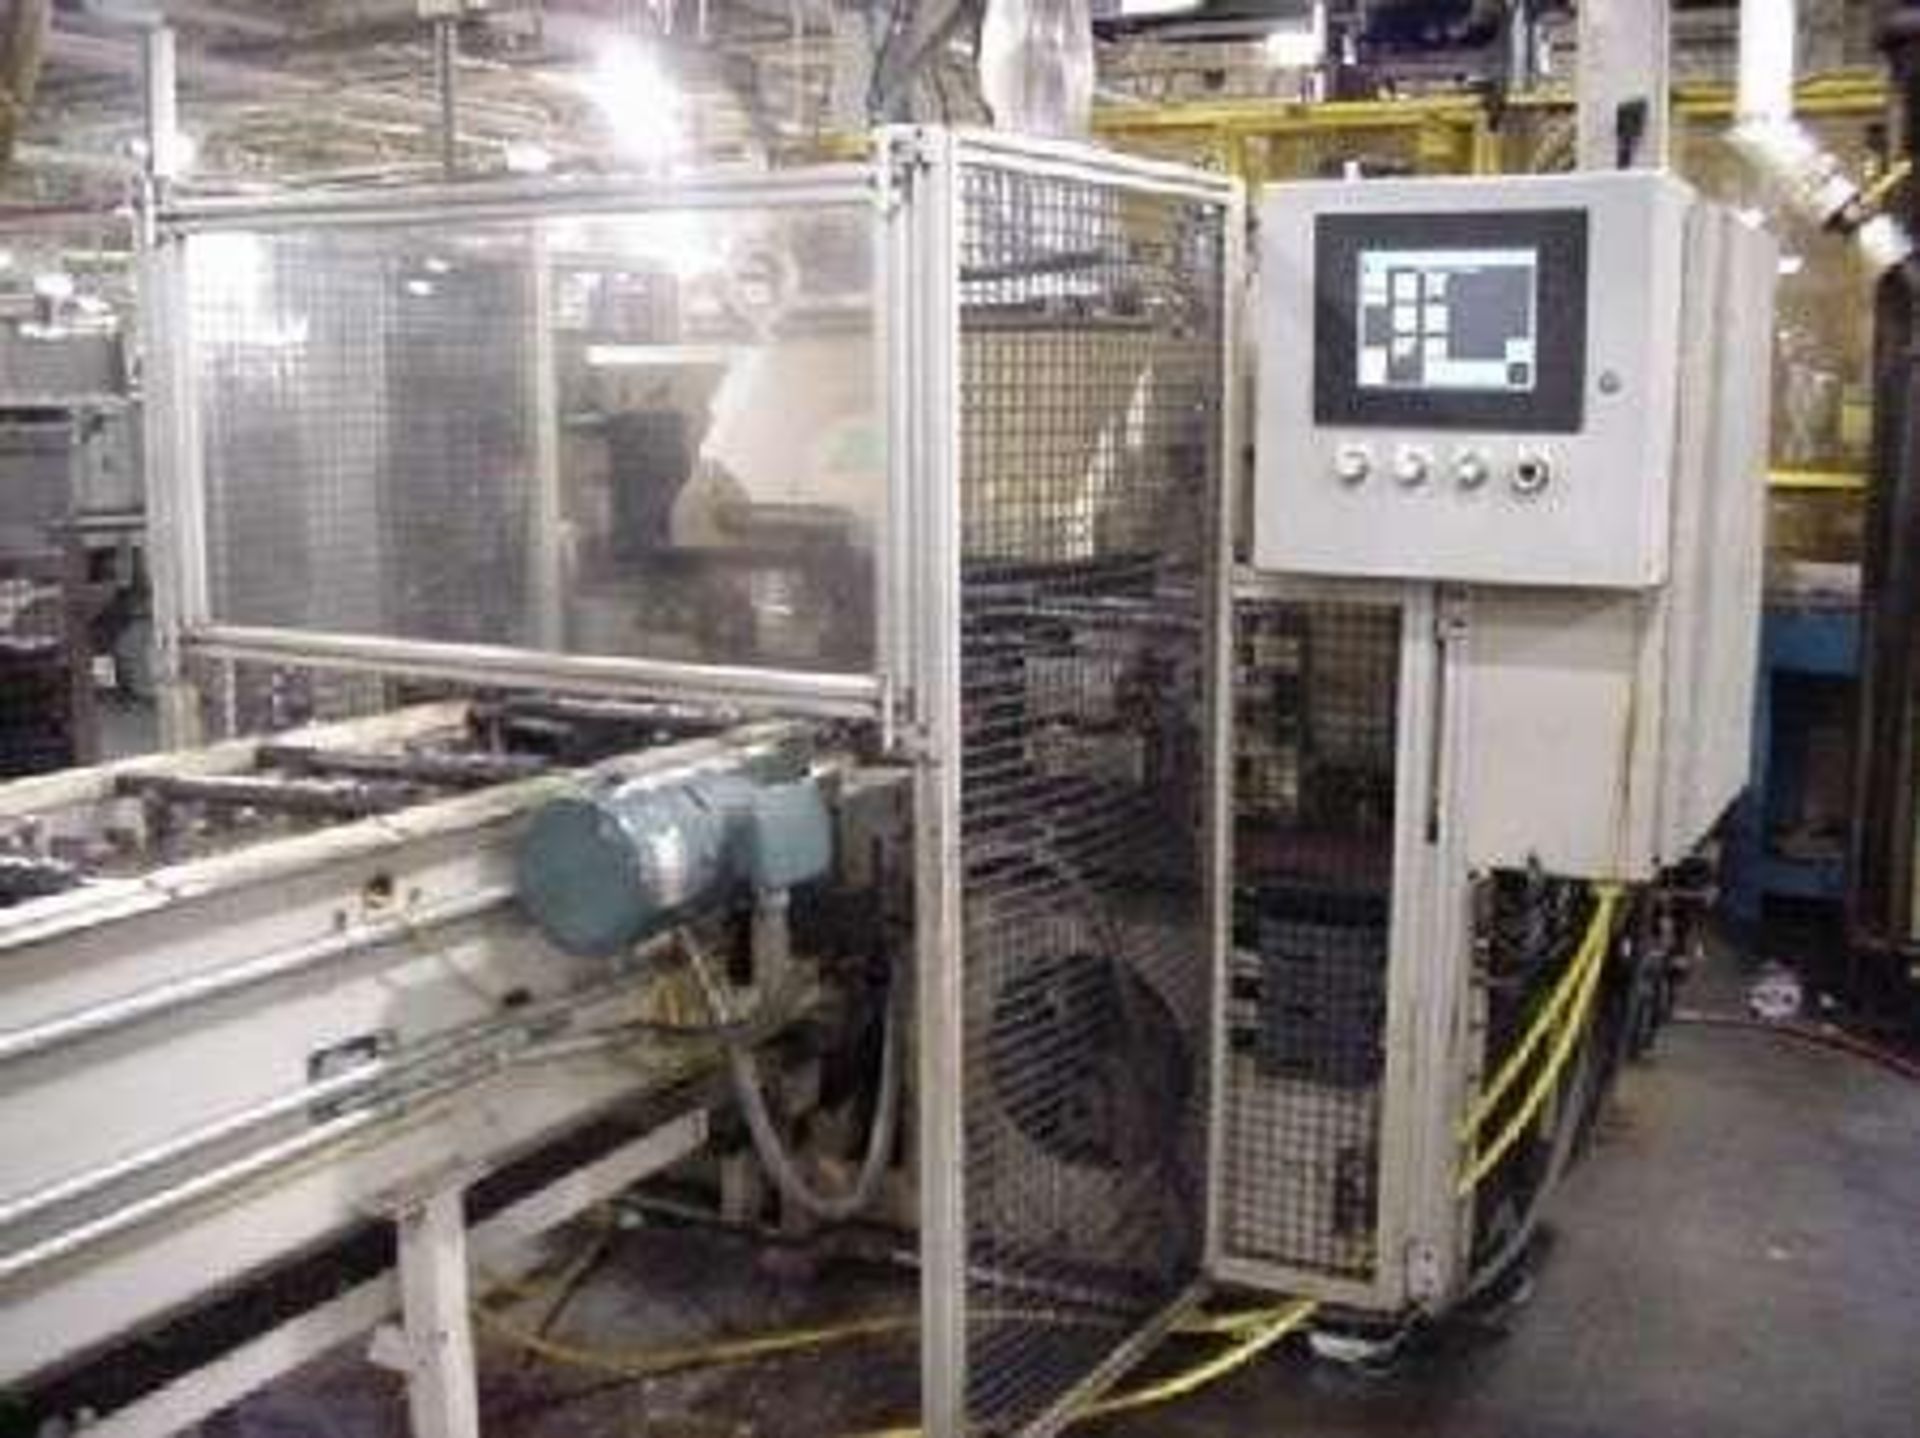 HESS  MAE 40 TON 40-AEM-750 AUTOMATIC STRAIGHTENING PRESS, SERIAL NUMBER 310, DATE OF MFG. 1997